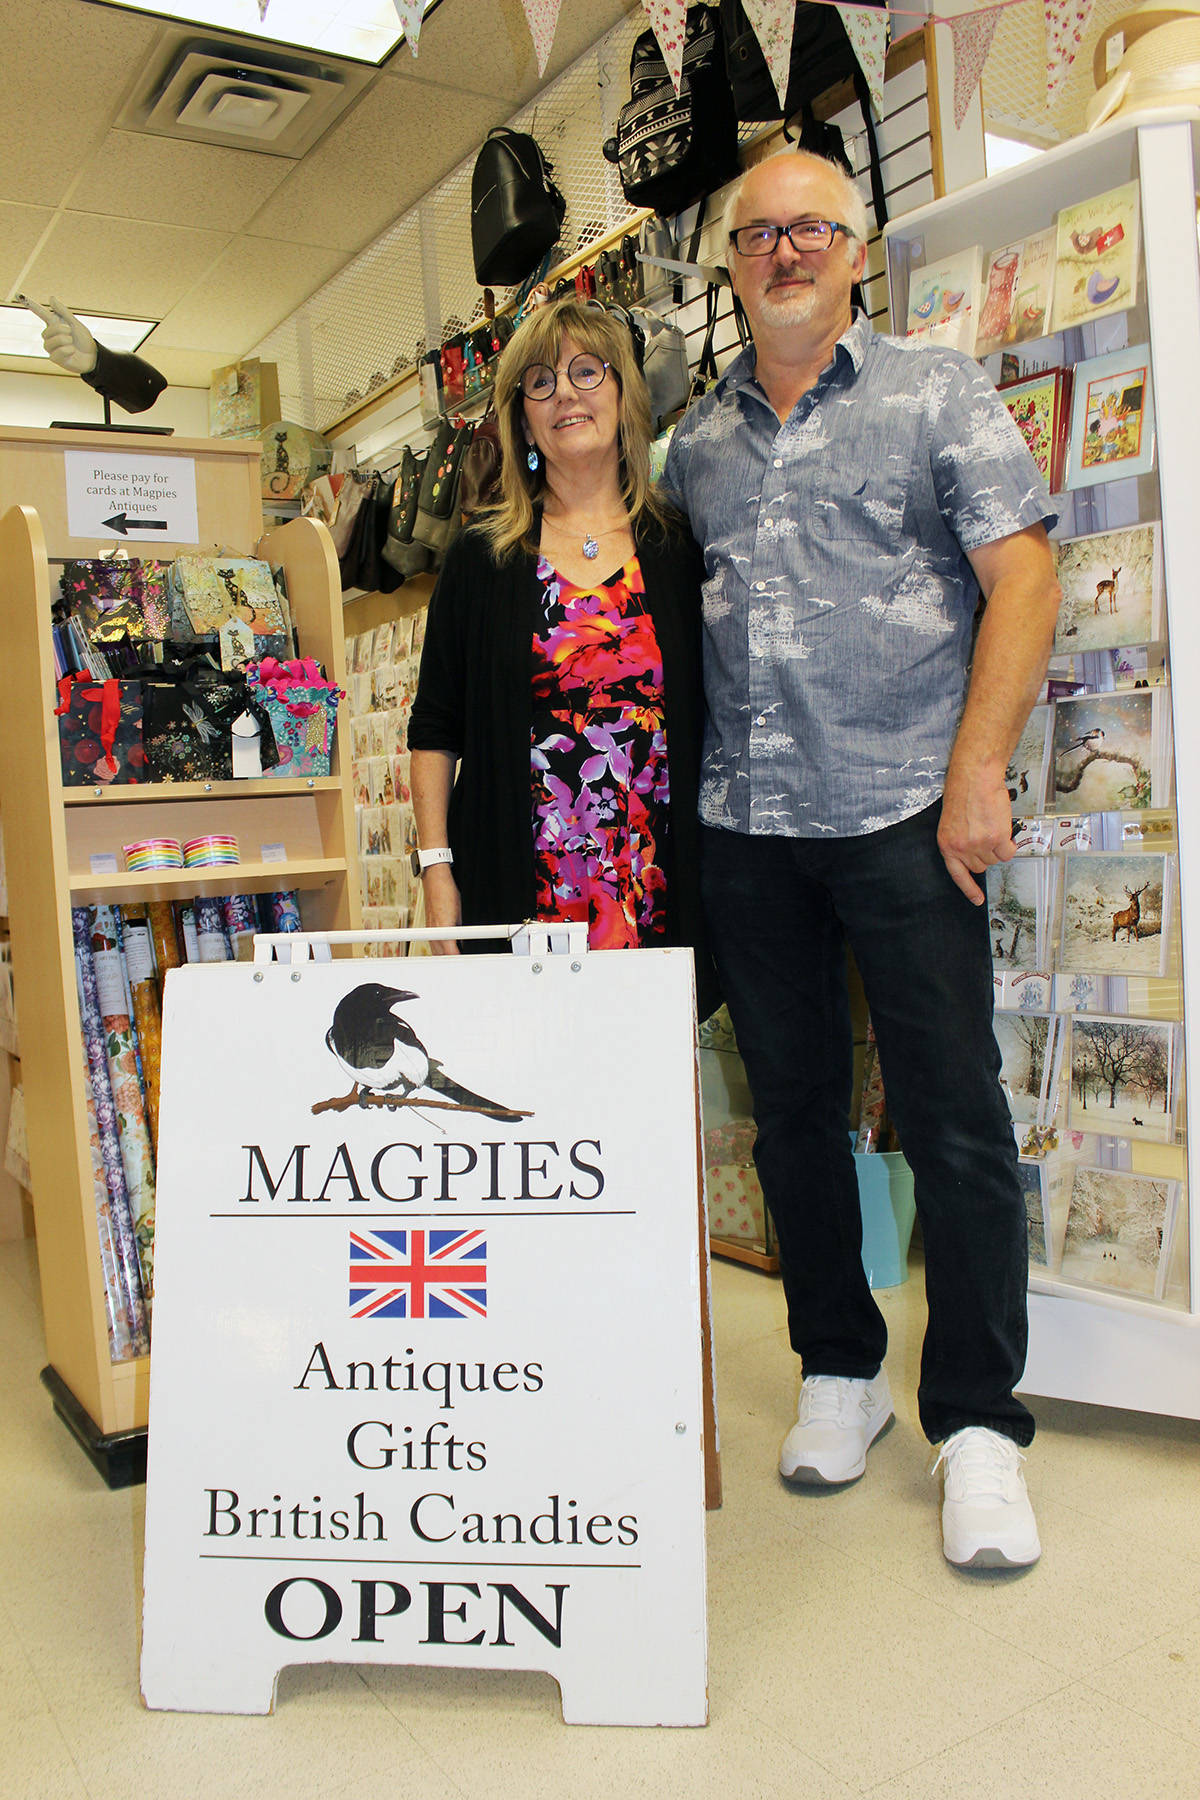 22845544_web1_201001-CHC-Magpies-donation-substantial_3